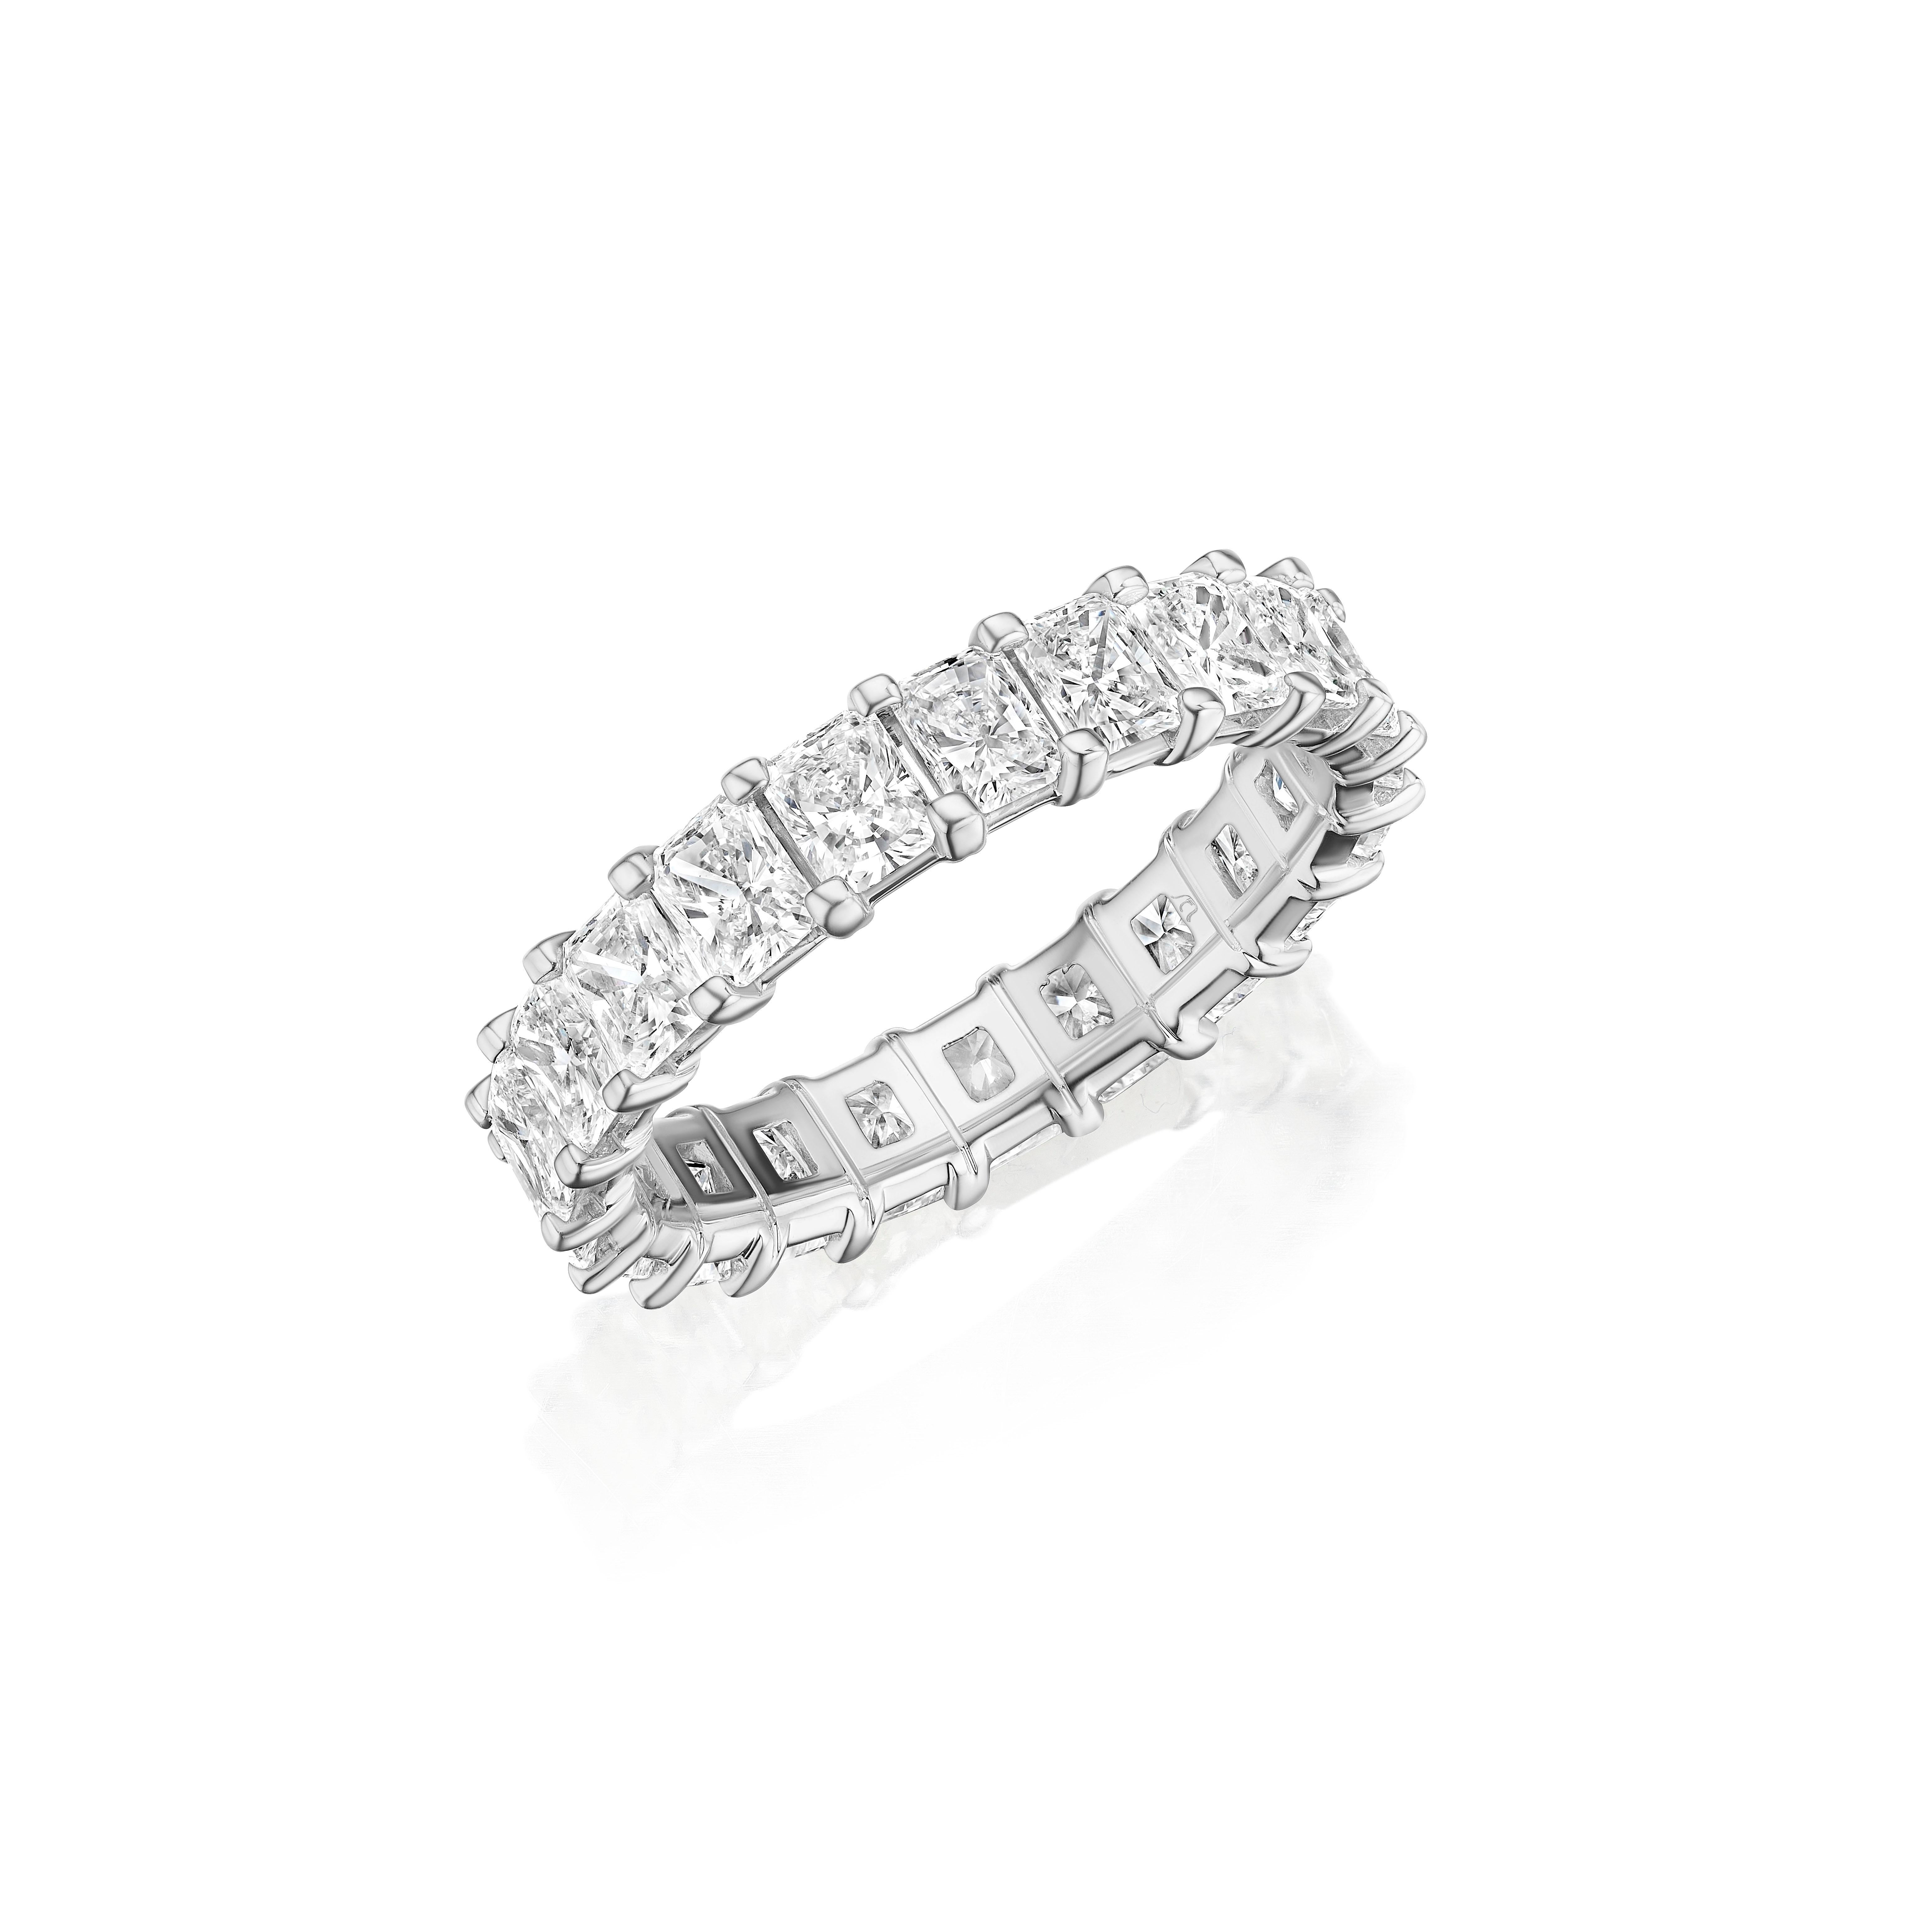 • Crafted in 18KT gold, this eternity band is made with 21 radiant cut diamonds, and has a combining total weight of approximately 3.15 carats. The diamonds are set into a shared prong basket setting. Worn beautifully on its own or stacked. A